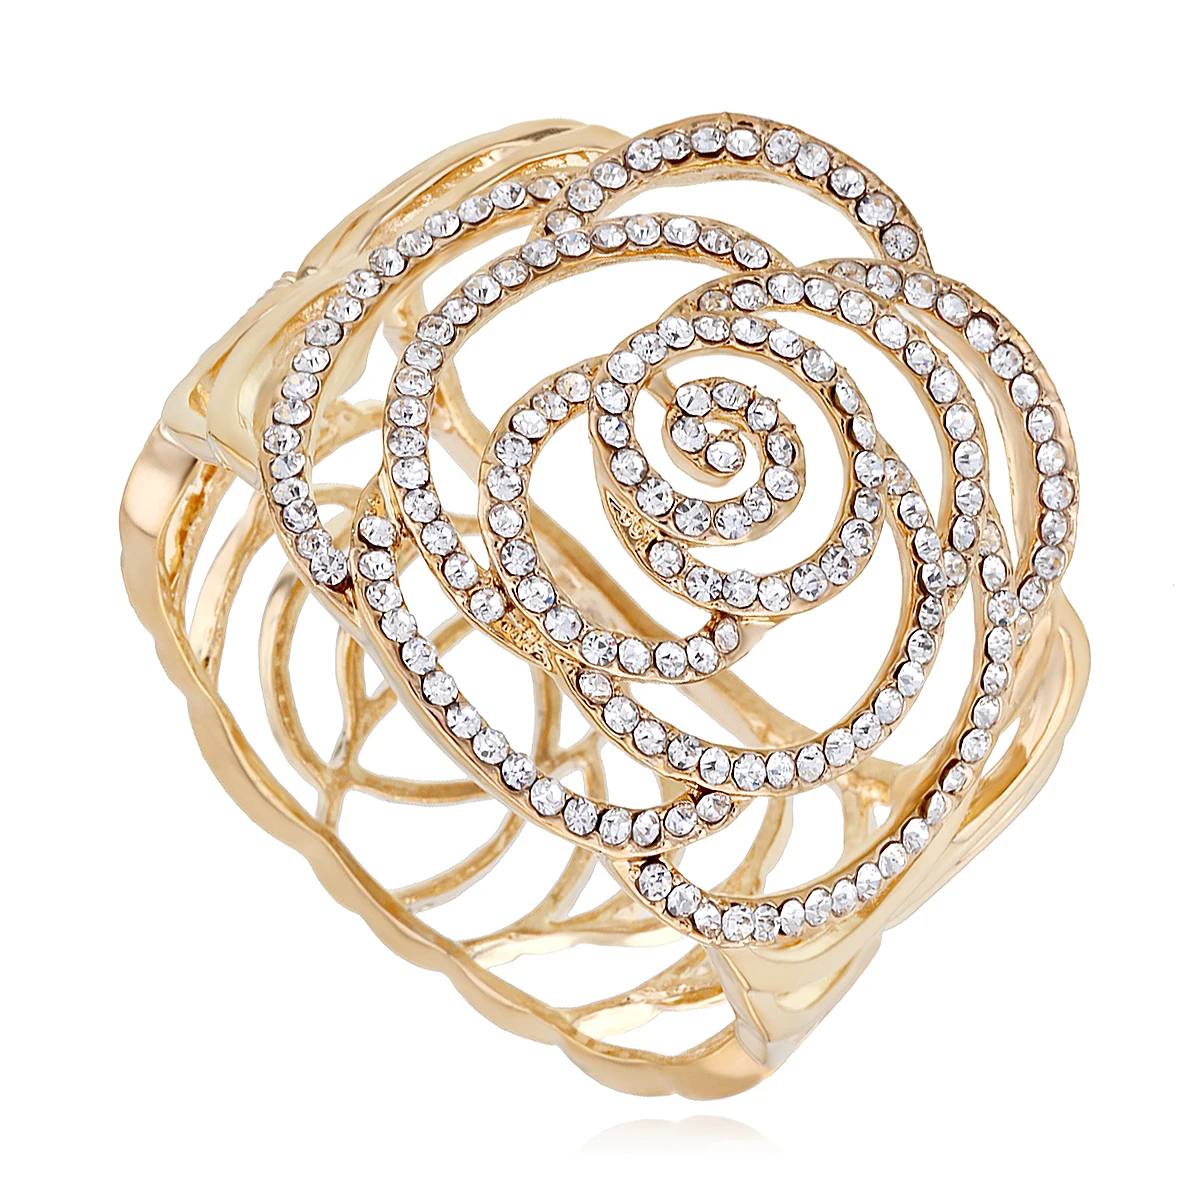 

HAHA&TOTO New Arrived Trendy Hollow Out Rose Flower Shape Cuff Bracelet Statement Open Bangle for Women Gold or Silver Plated